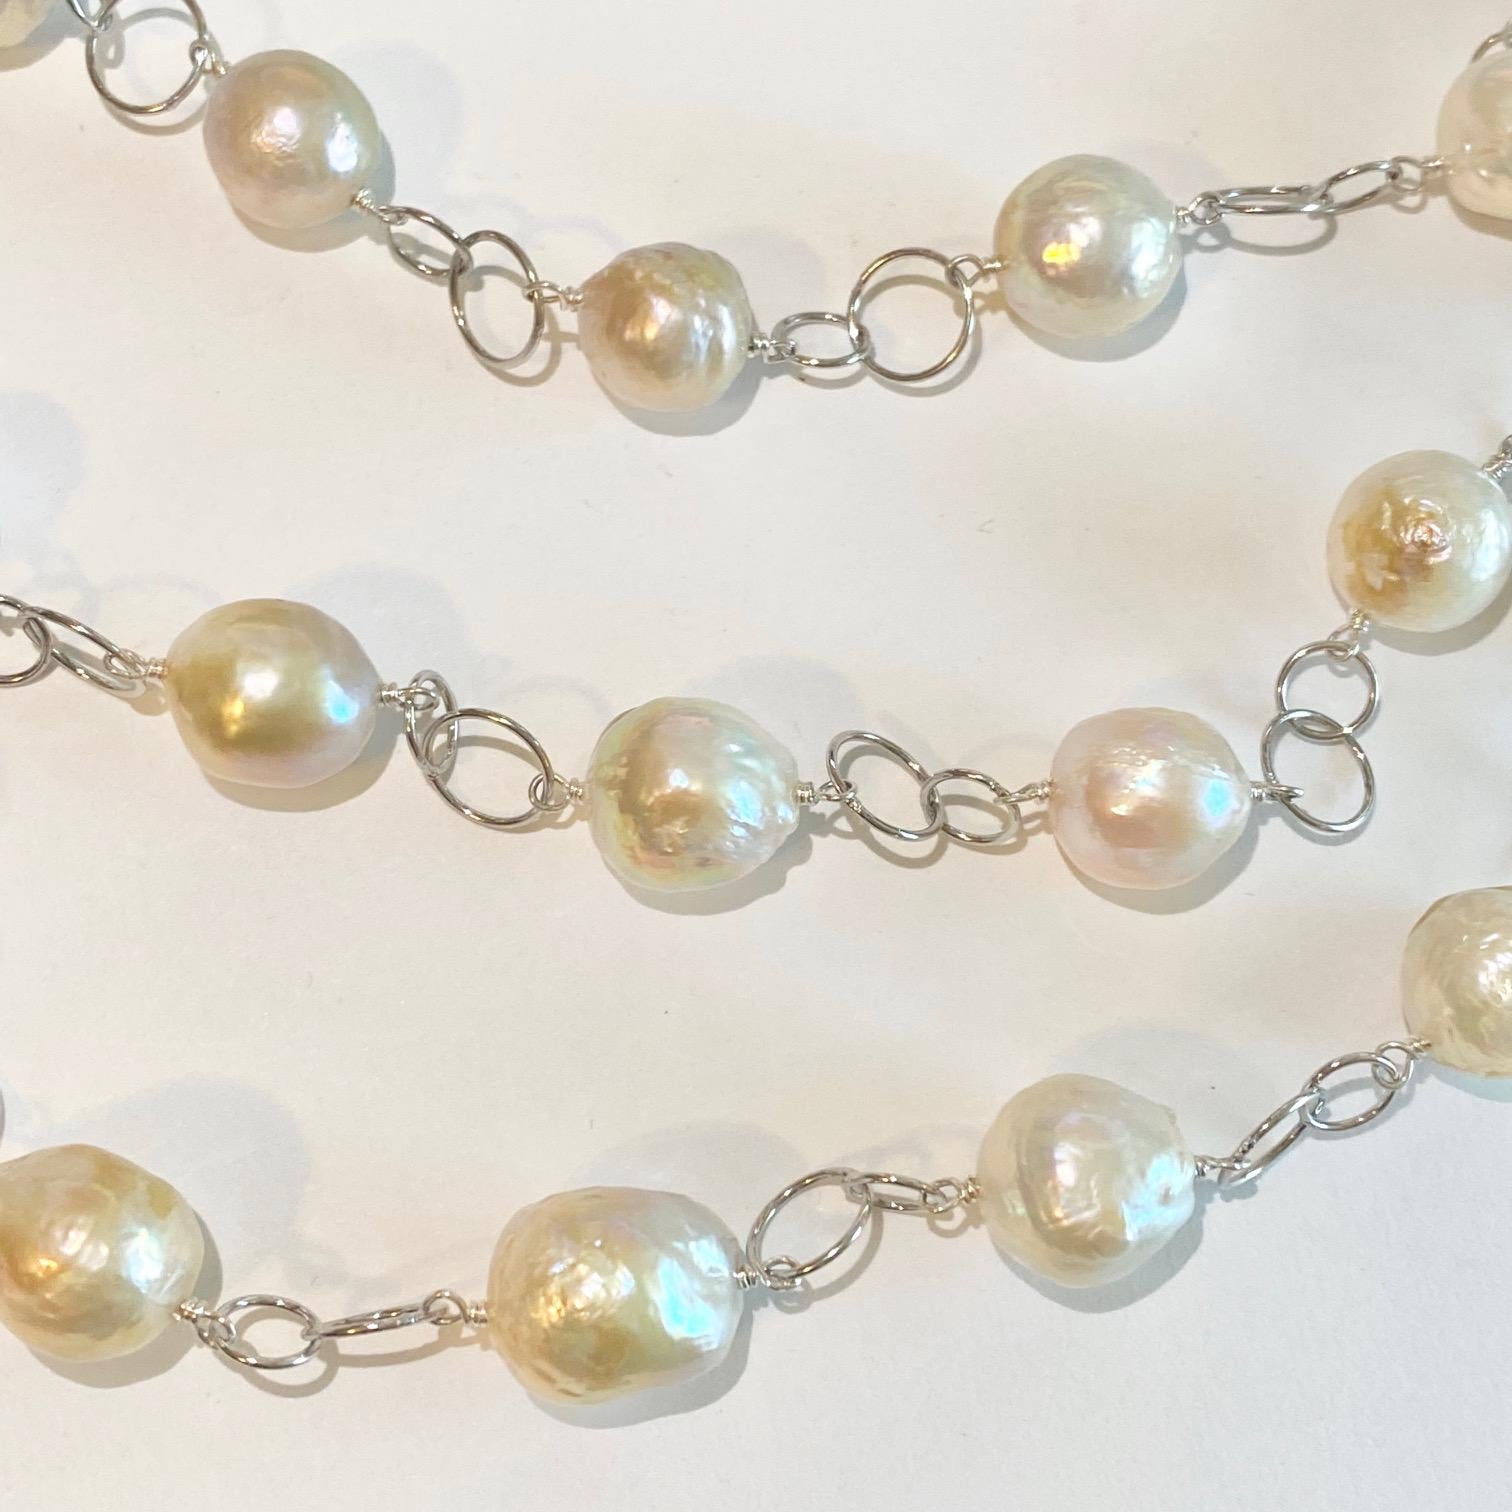 This necklace is one-of-a-kind and made by our jewelry designers in our shop! It is an adjustable, versatile pearl strand necklace with three strands layered with one inch separating each strand! The pearls have gorgeous colors that are pink and